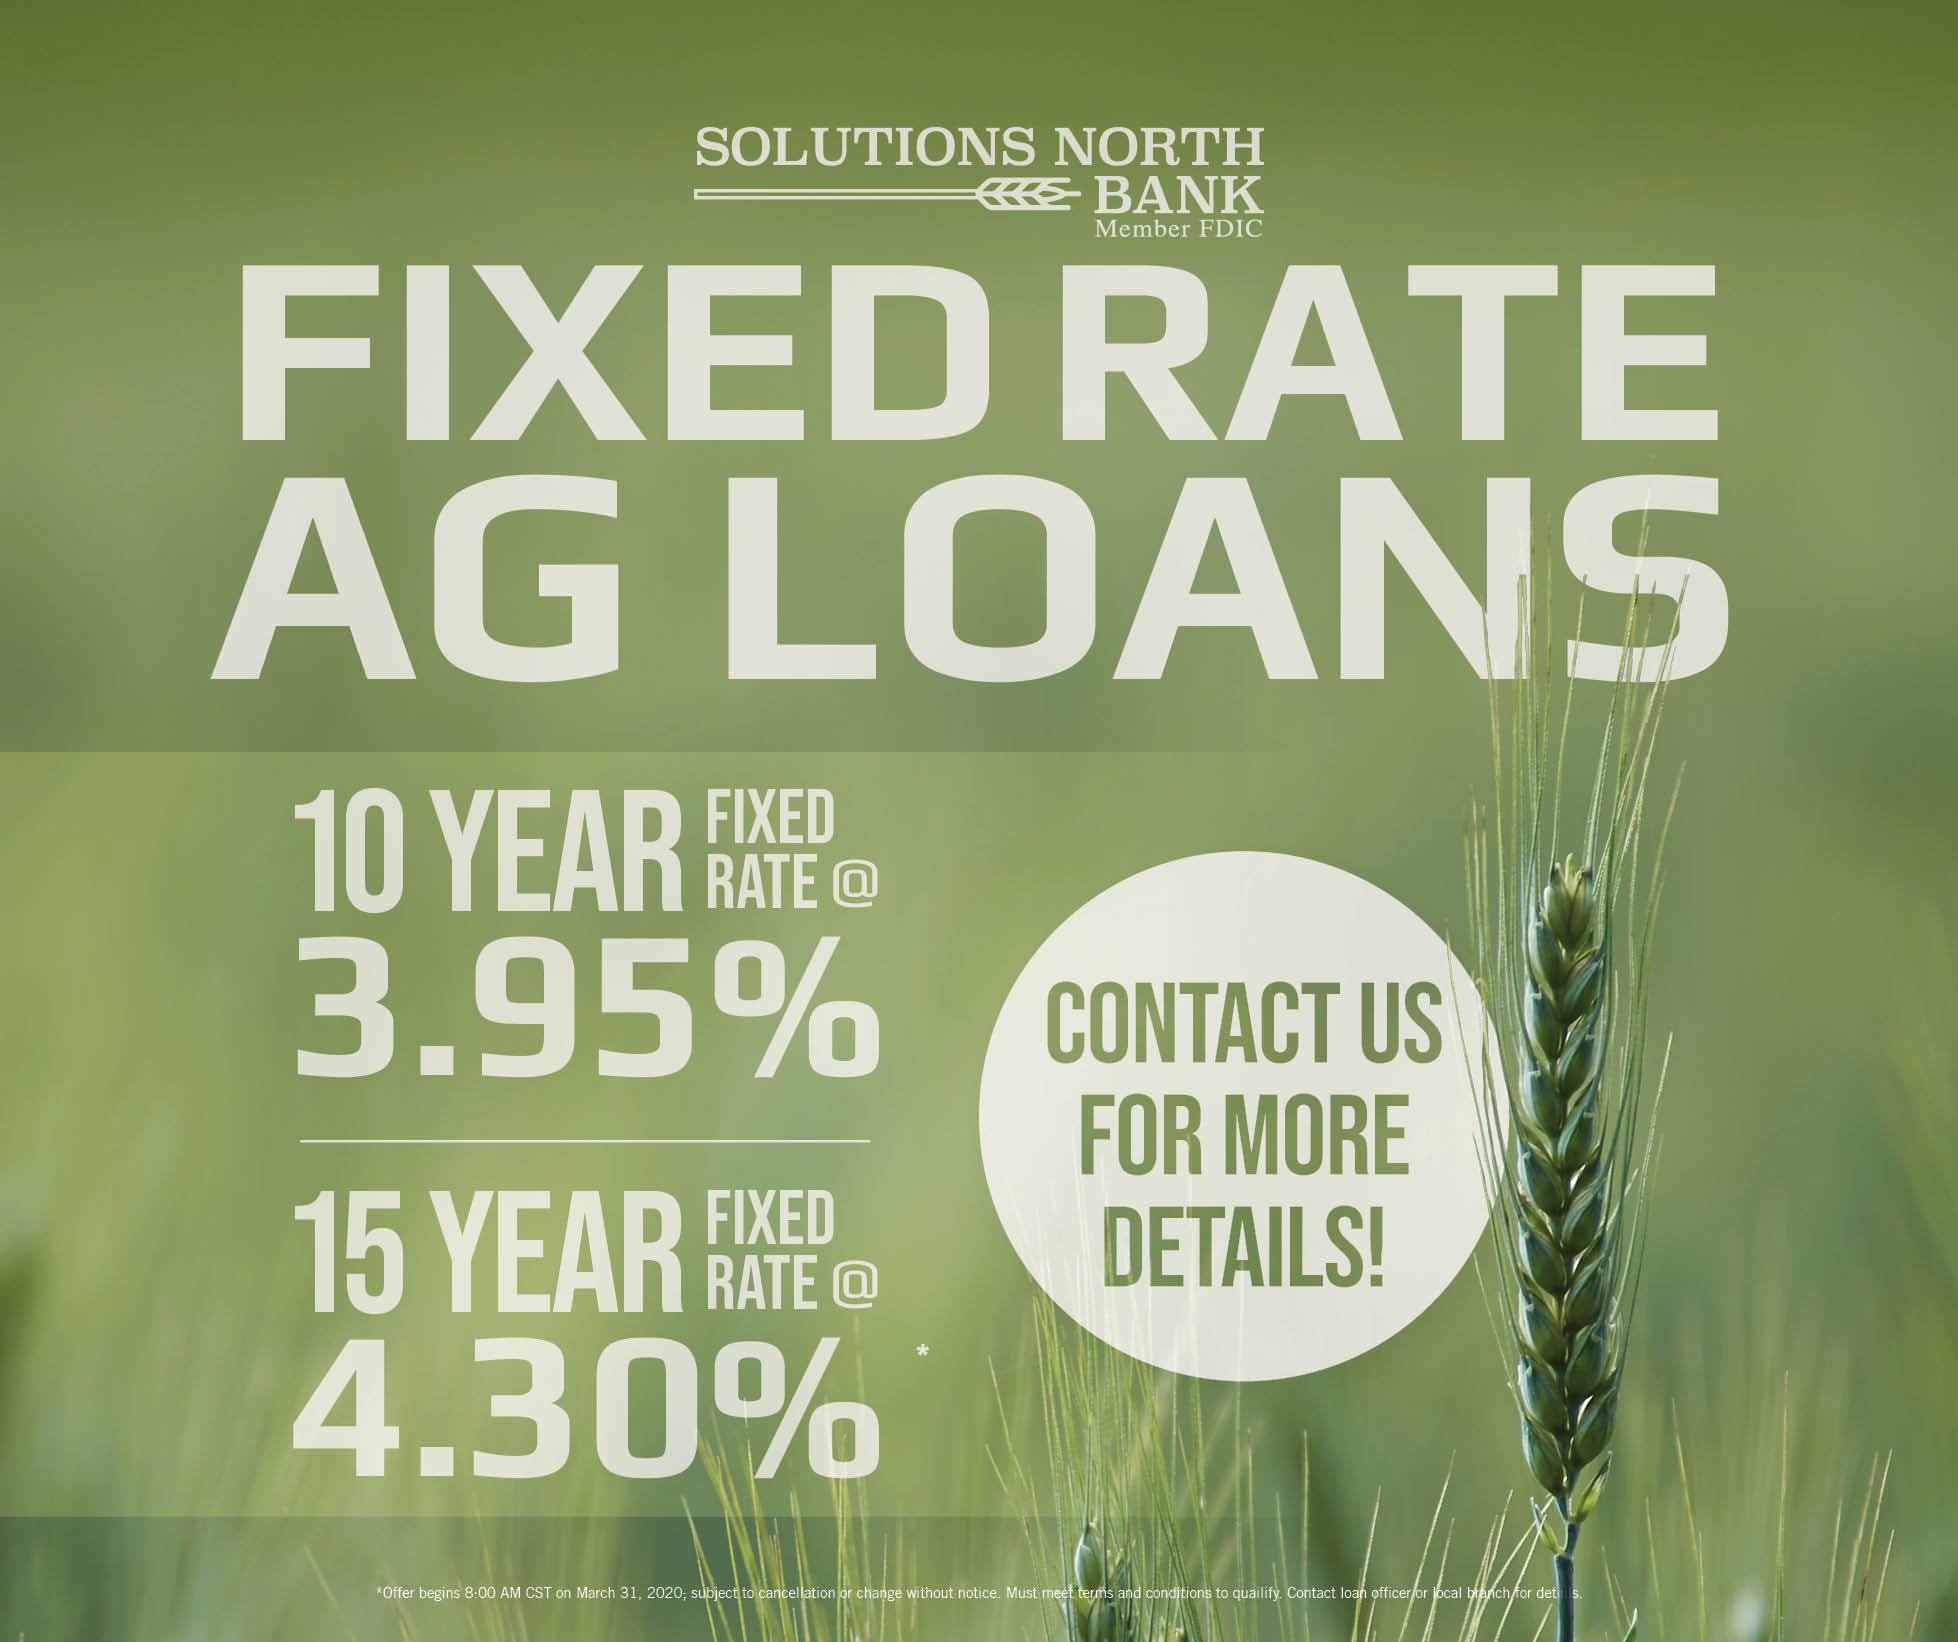 Fixed Rate Ag Loans